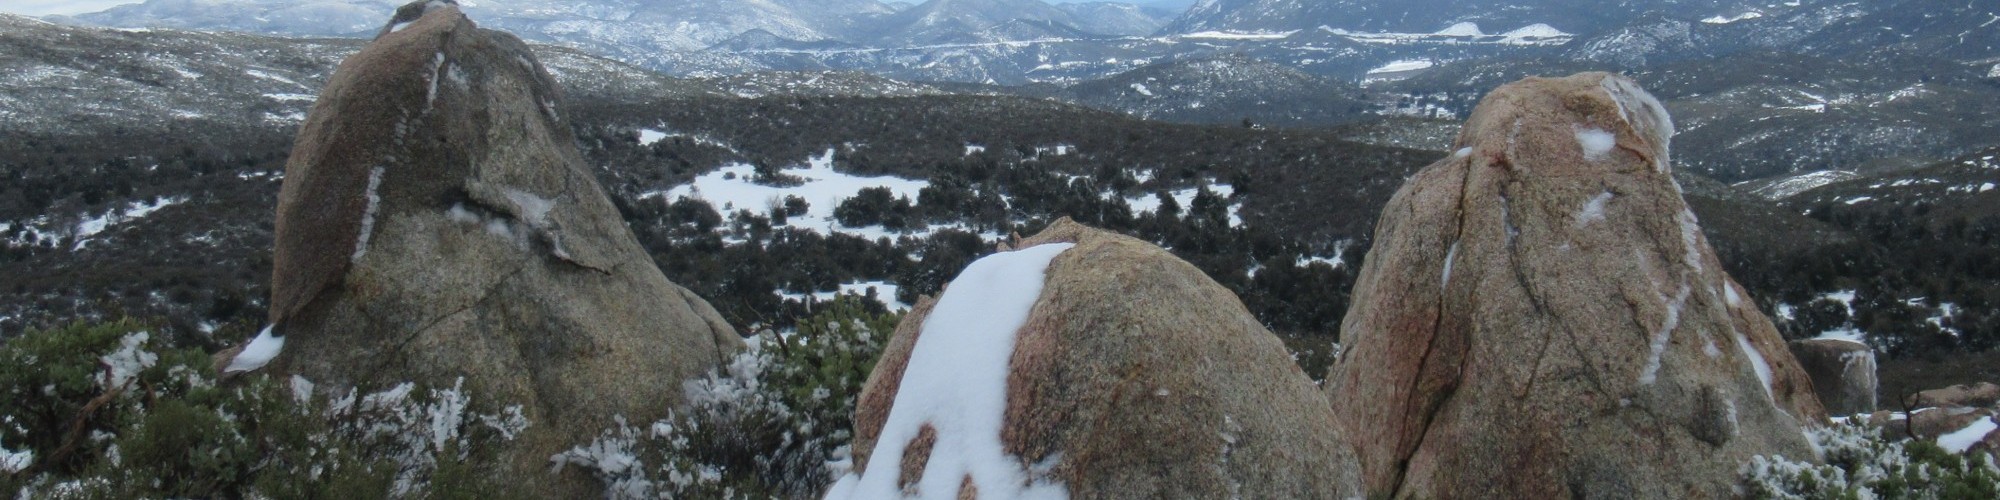 view from a mountain top with boulders in foreground